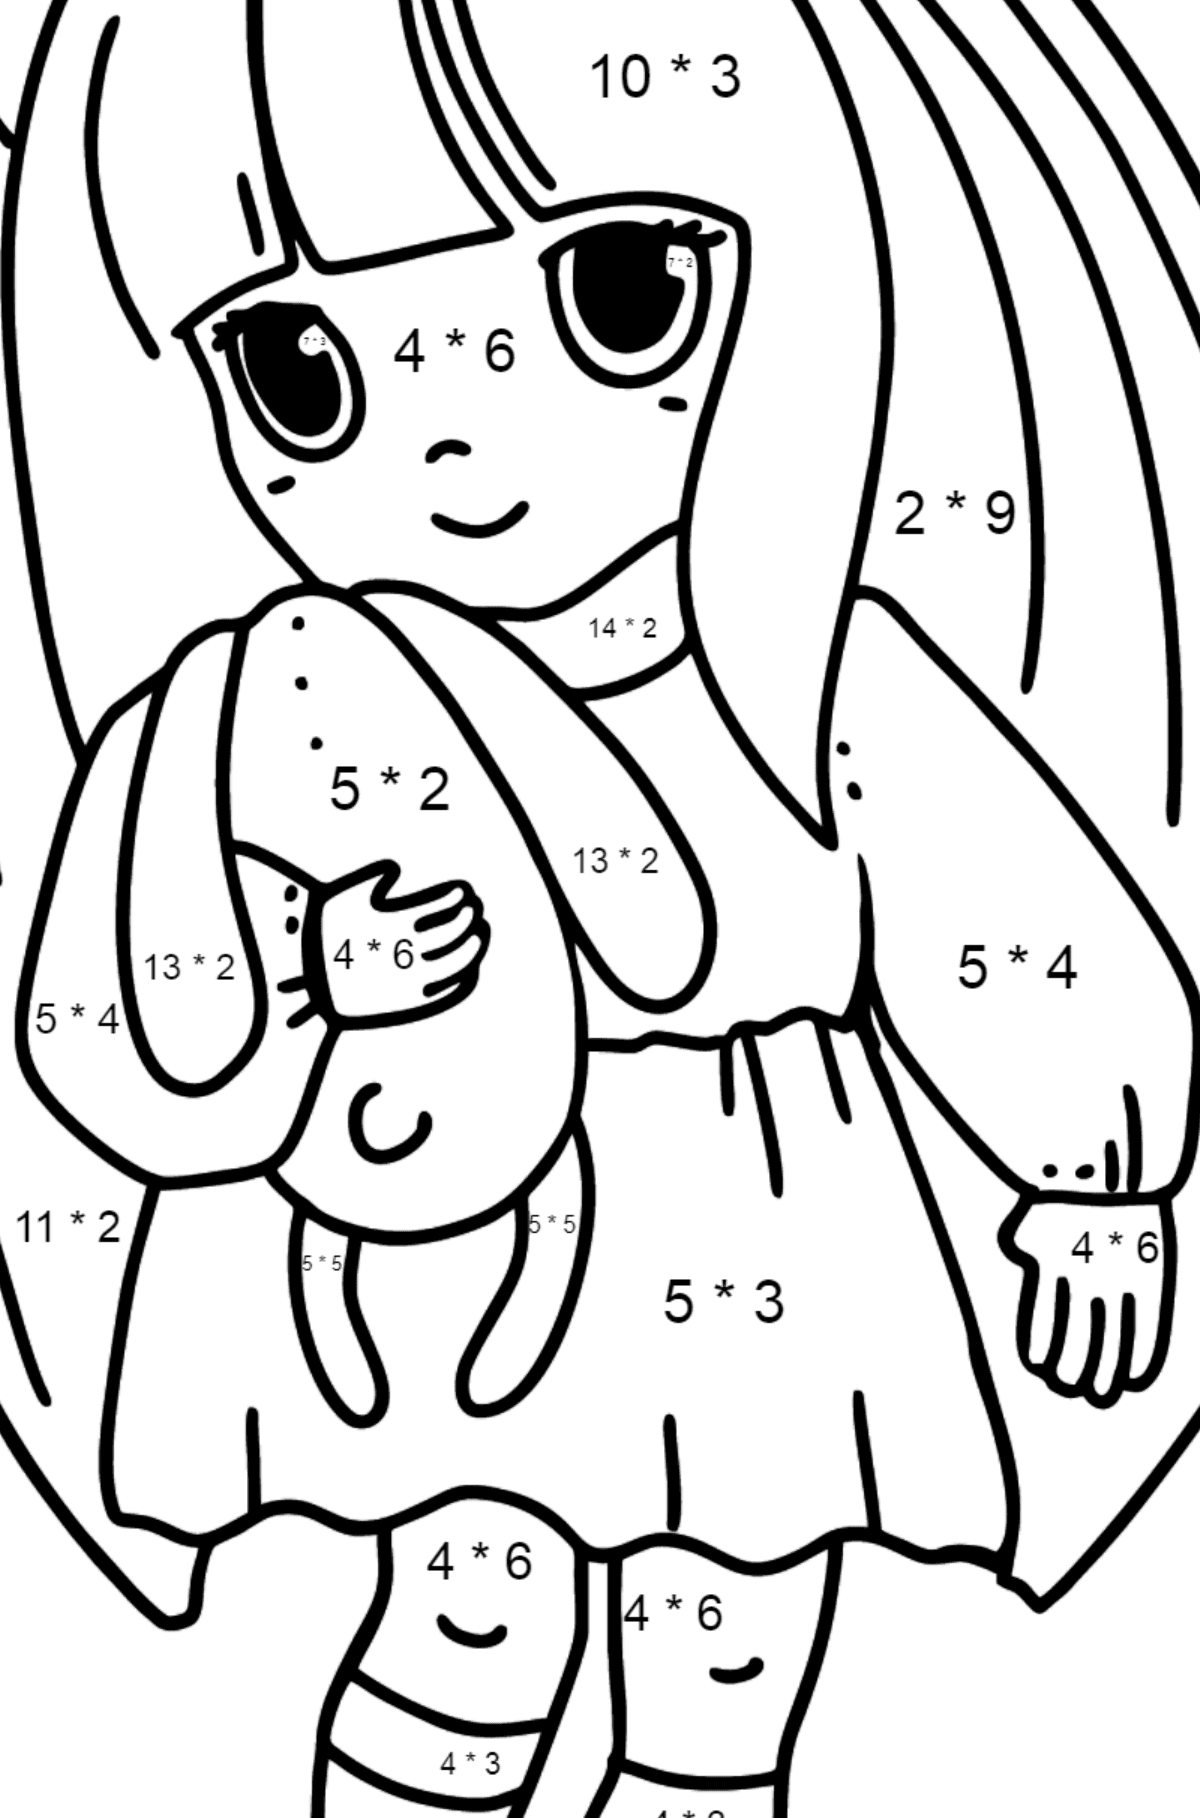 Anime Little Girl Coloring Pages - Math Coloring - Multiplication for Kids